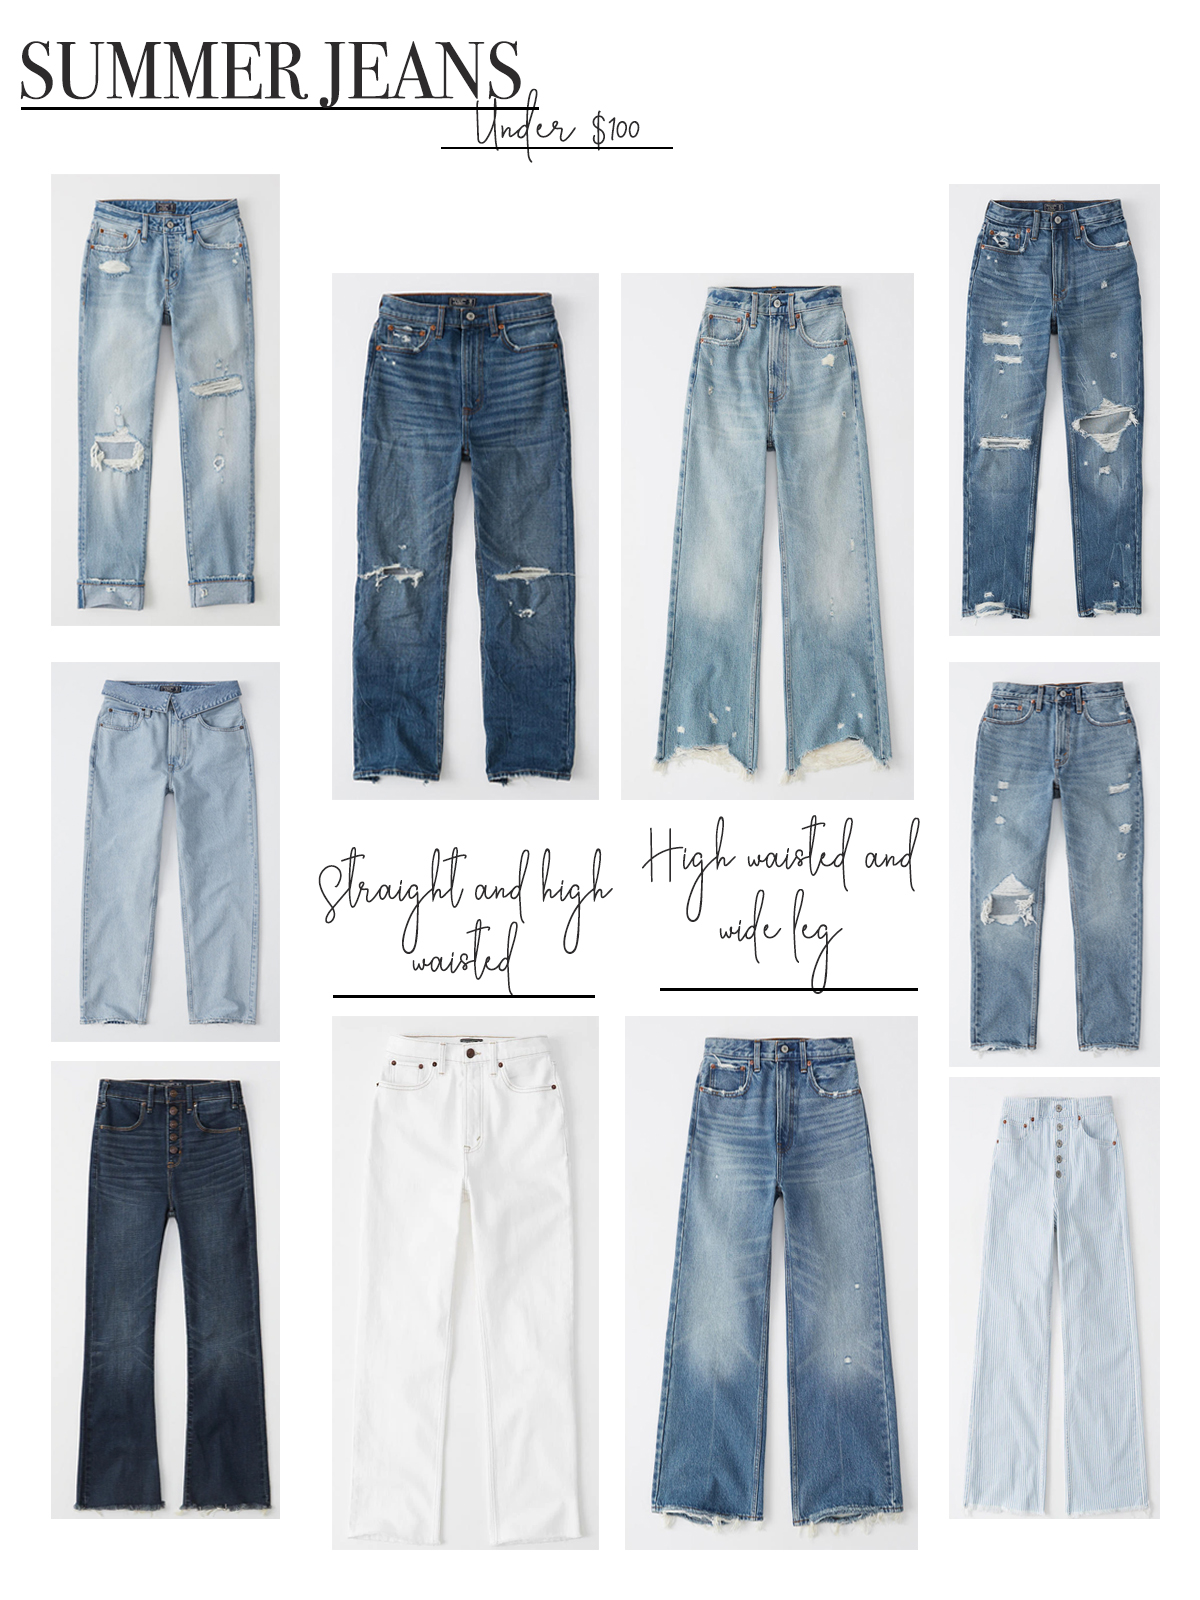 Abercrombie & Fitch jeans